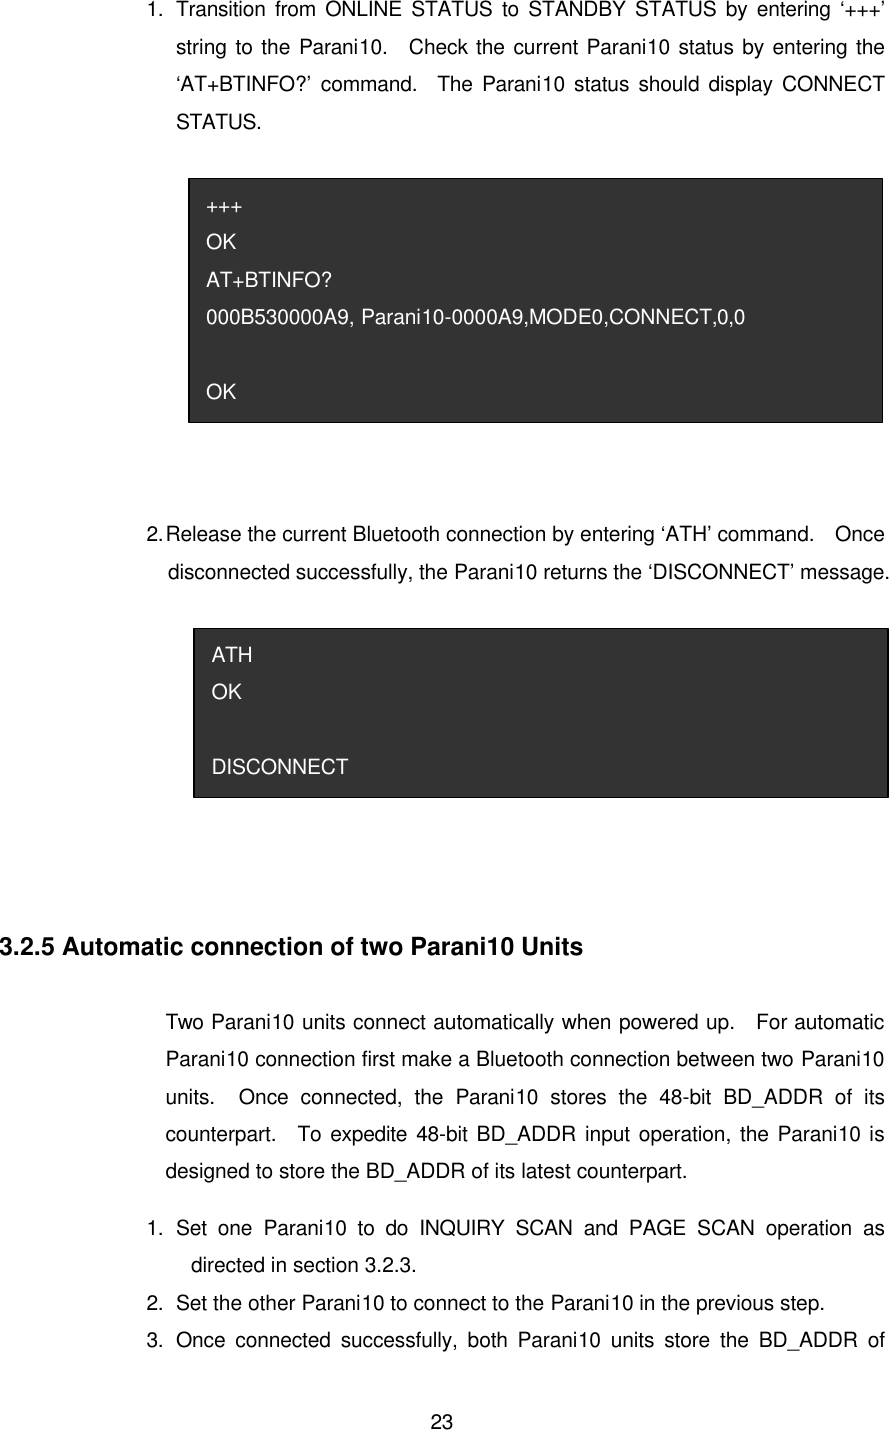  231.   Transition from ONLINE STATUS to STANDBY STATUS by entering ‘+++’ string to the Parani10.  Check the current Parani10 status by entering the ‘AT+BTINFO?’ command.  The Parani10 status should display CONNECT STATUS.  2. Release the current Bluetooth connection by entering ‘ATH’ command.  Once disconnected successfully, the Parani10 returns the ‘DISCONNECT’ message.   3.2.5 Automatic connection of two Parani10 Units  Two Parani10 units connect automatically when powered up.  For automatic Parani10 connection first make a Bluetooth connection between two Parani10 units.  Once connected, the Parani10 stores the 48-bit BD_ADDR of its counterpart.  To expedite 48-bit BD_ADDR input operation, the Parani10 is designed to store the BD_ADDR of its latest counterpart.   1.   Set one Parani10 to do INQUIRY SCAN and PAGE SCAN operation as directed in section 3.2.3. 2.   Set the other Parani10 to connect to the Parani10 in the previous step. 3.   Once connected successfully, both Parani10 units store the BD_ADDR of ATH OK  DISCONNECT +++ OK AT+BTINFO? 000B530000A9, Parani10-0000A9,MODE0,CONNECT,0,0  OK 